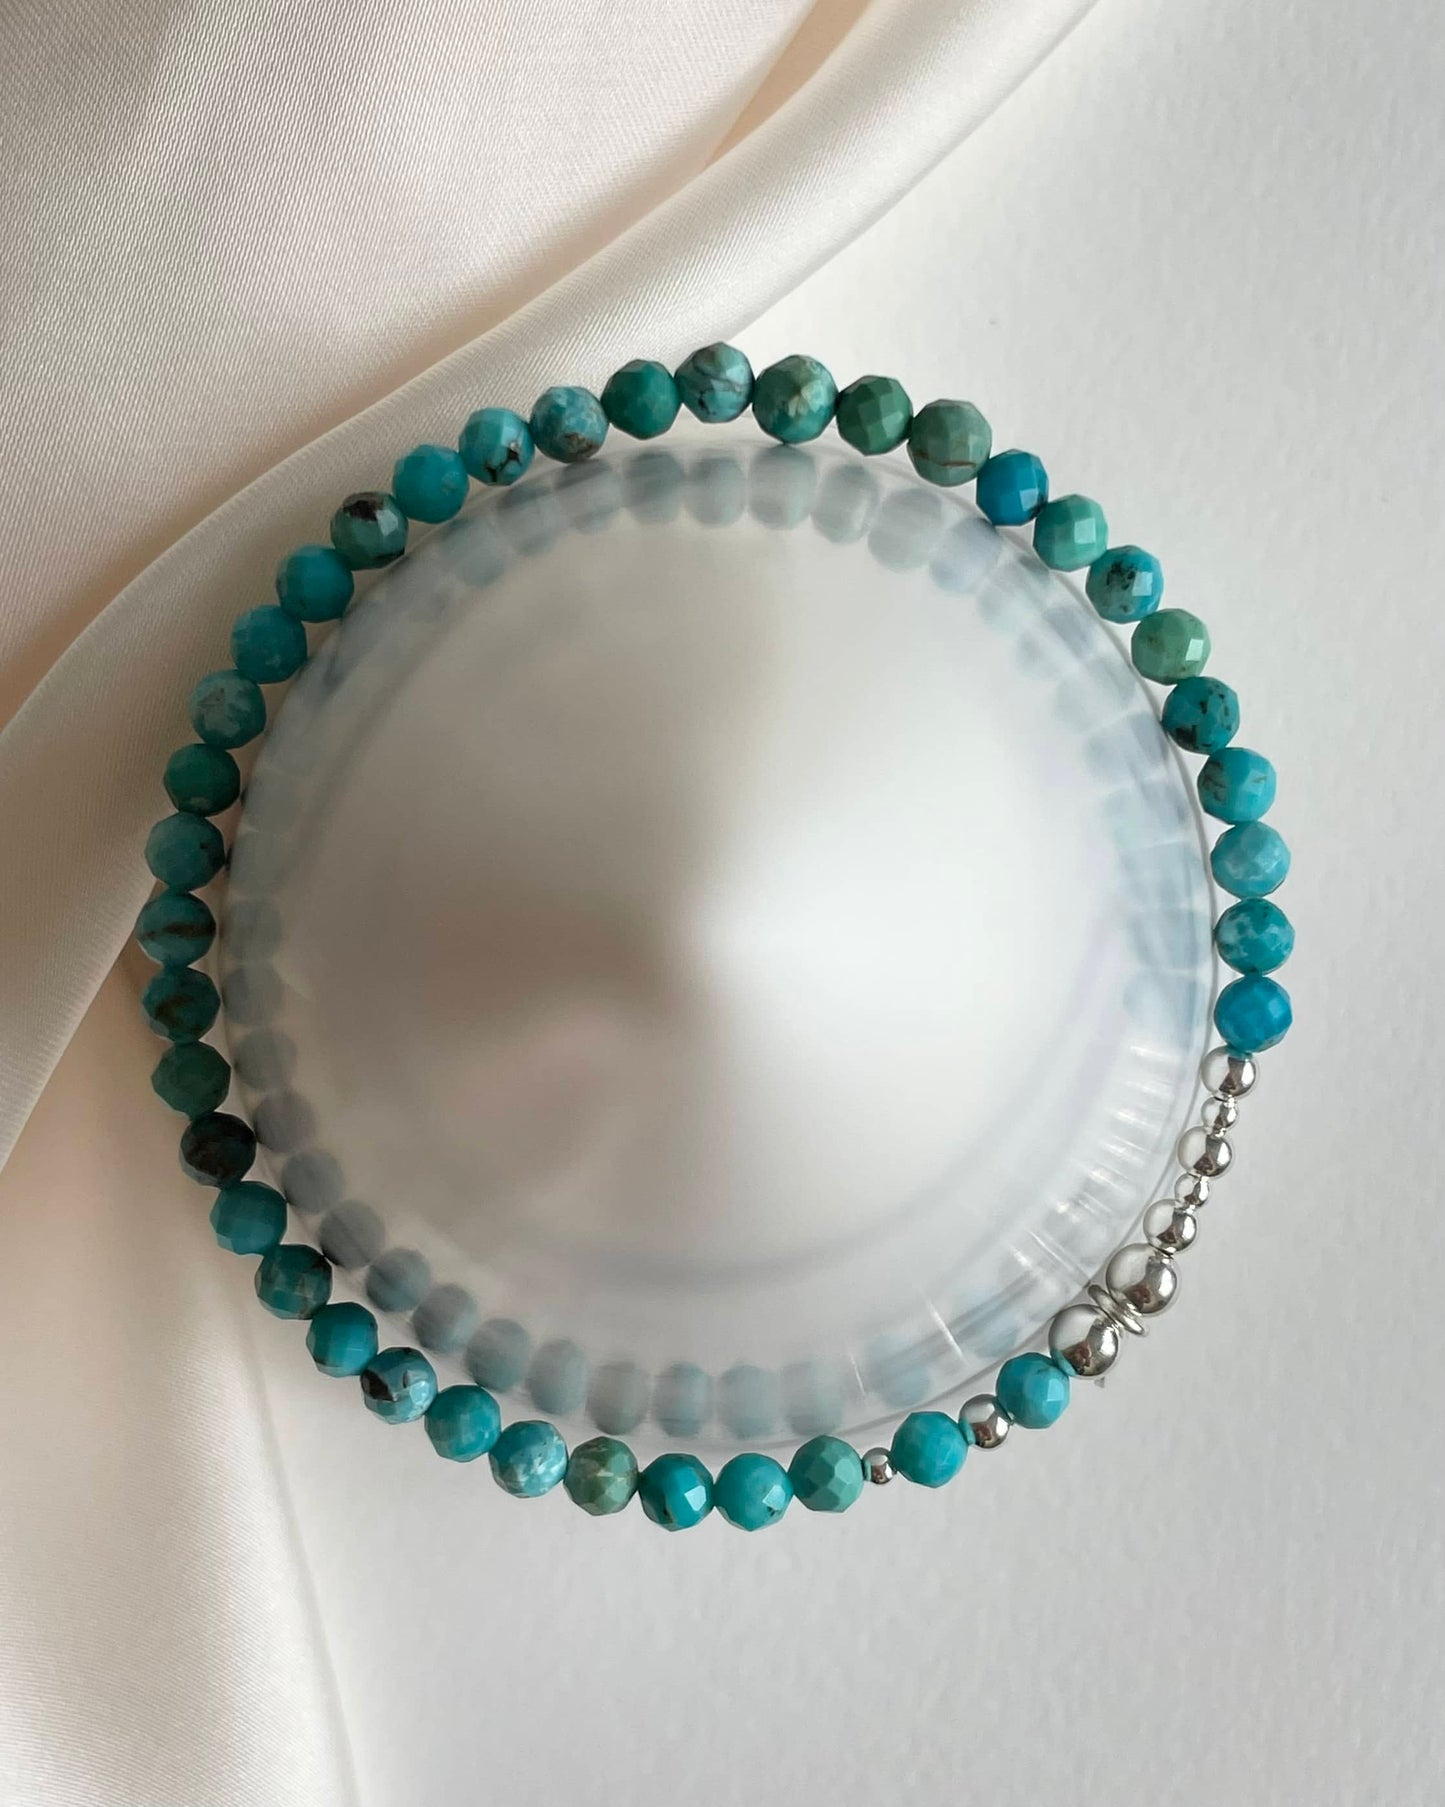 925 Sterling Silver December birthstone bracelet made with Natural Turquoise.